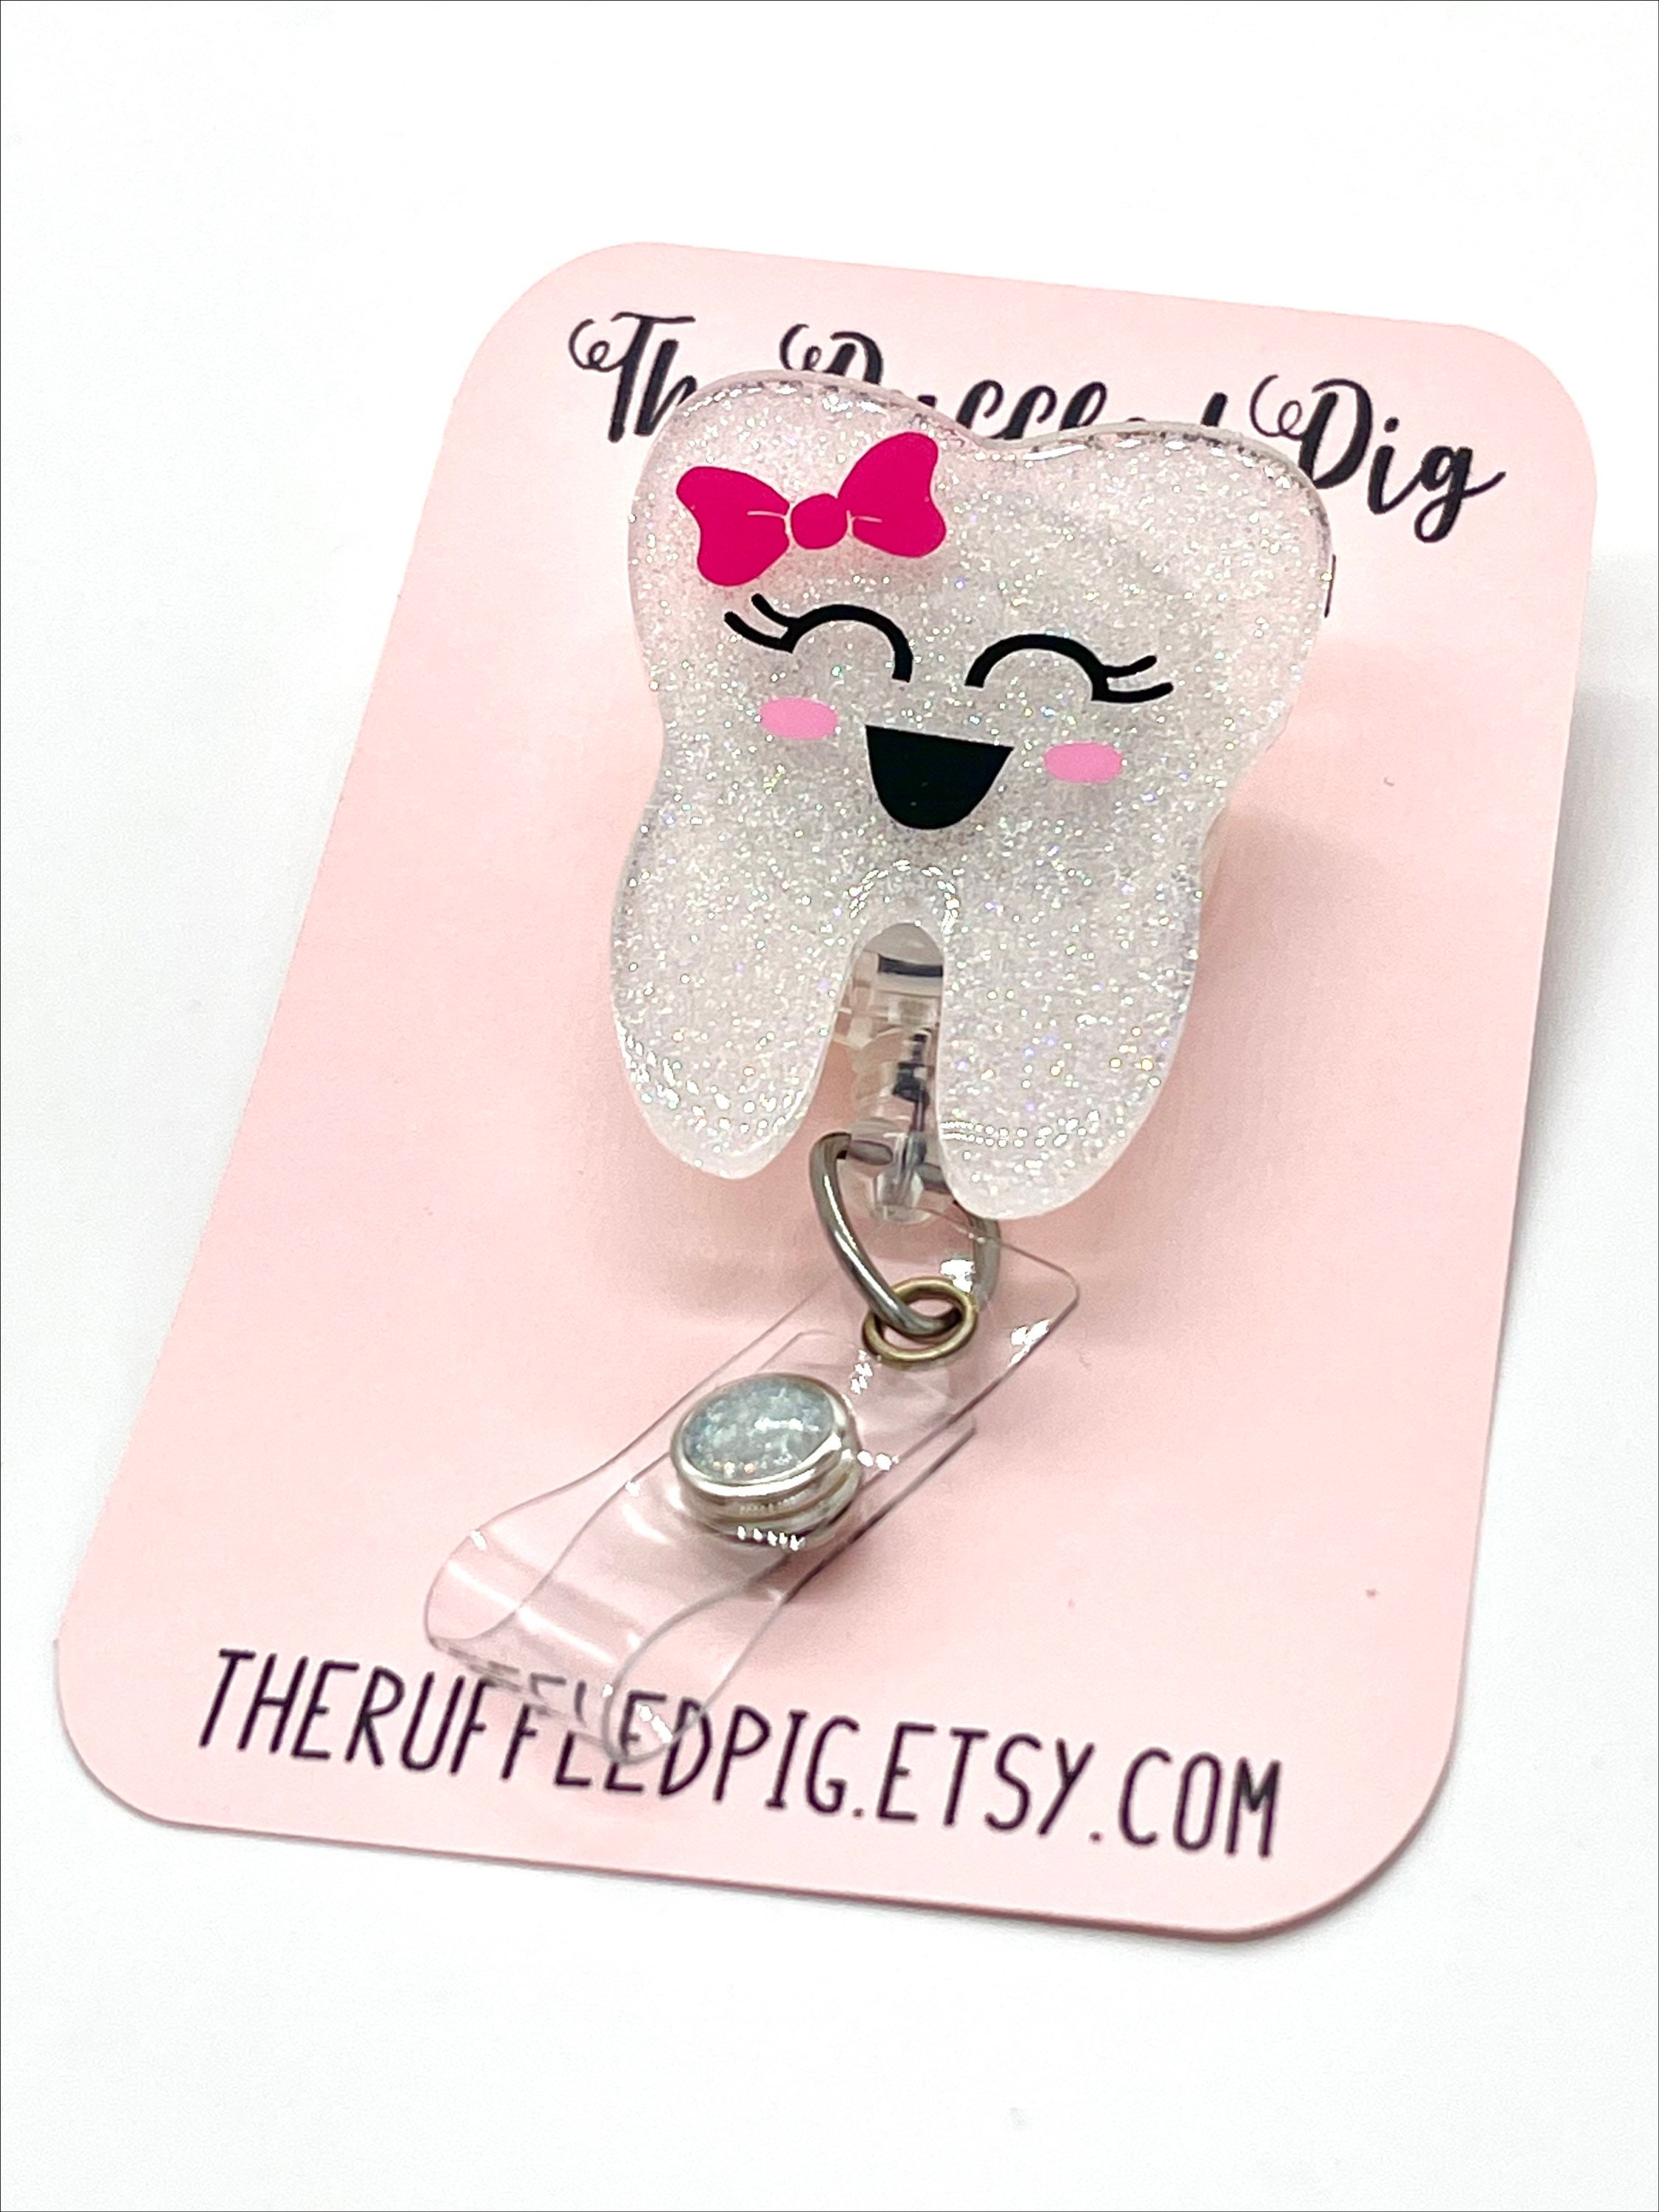 Tooth Retractable Badge Reel, Dentist ID Holder, Dental Hygienist Assistant  Key Card, Cute Acrylic Gift, Orthodontics Staff, Easy to Clean -  Canada